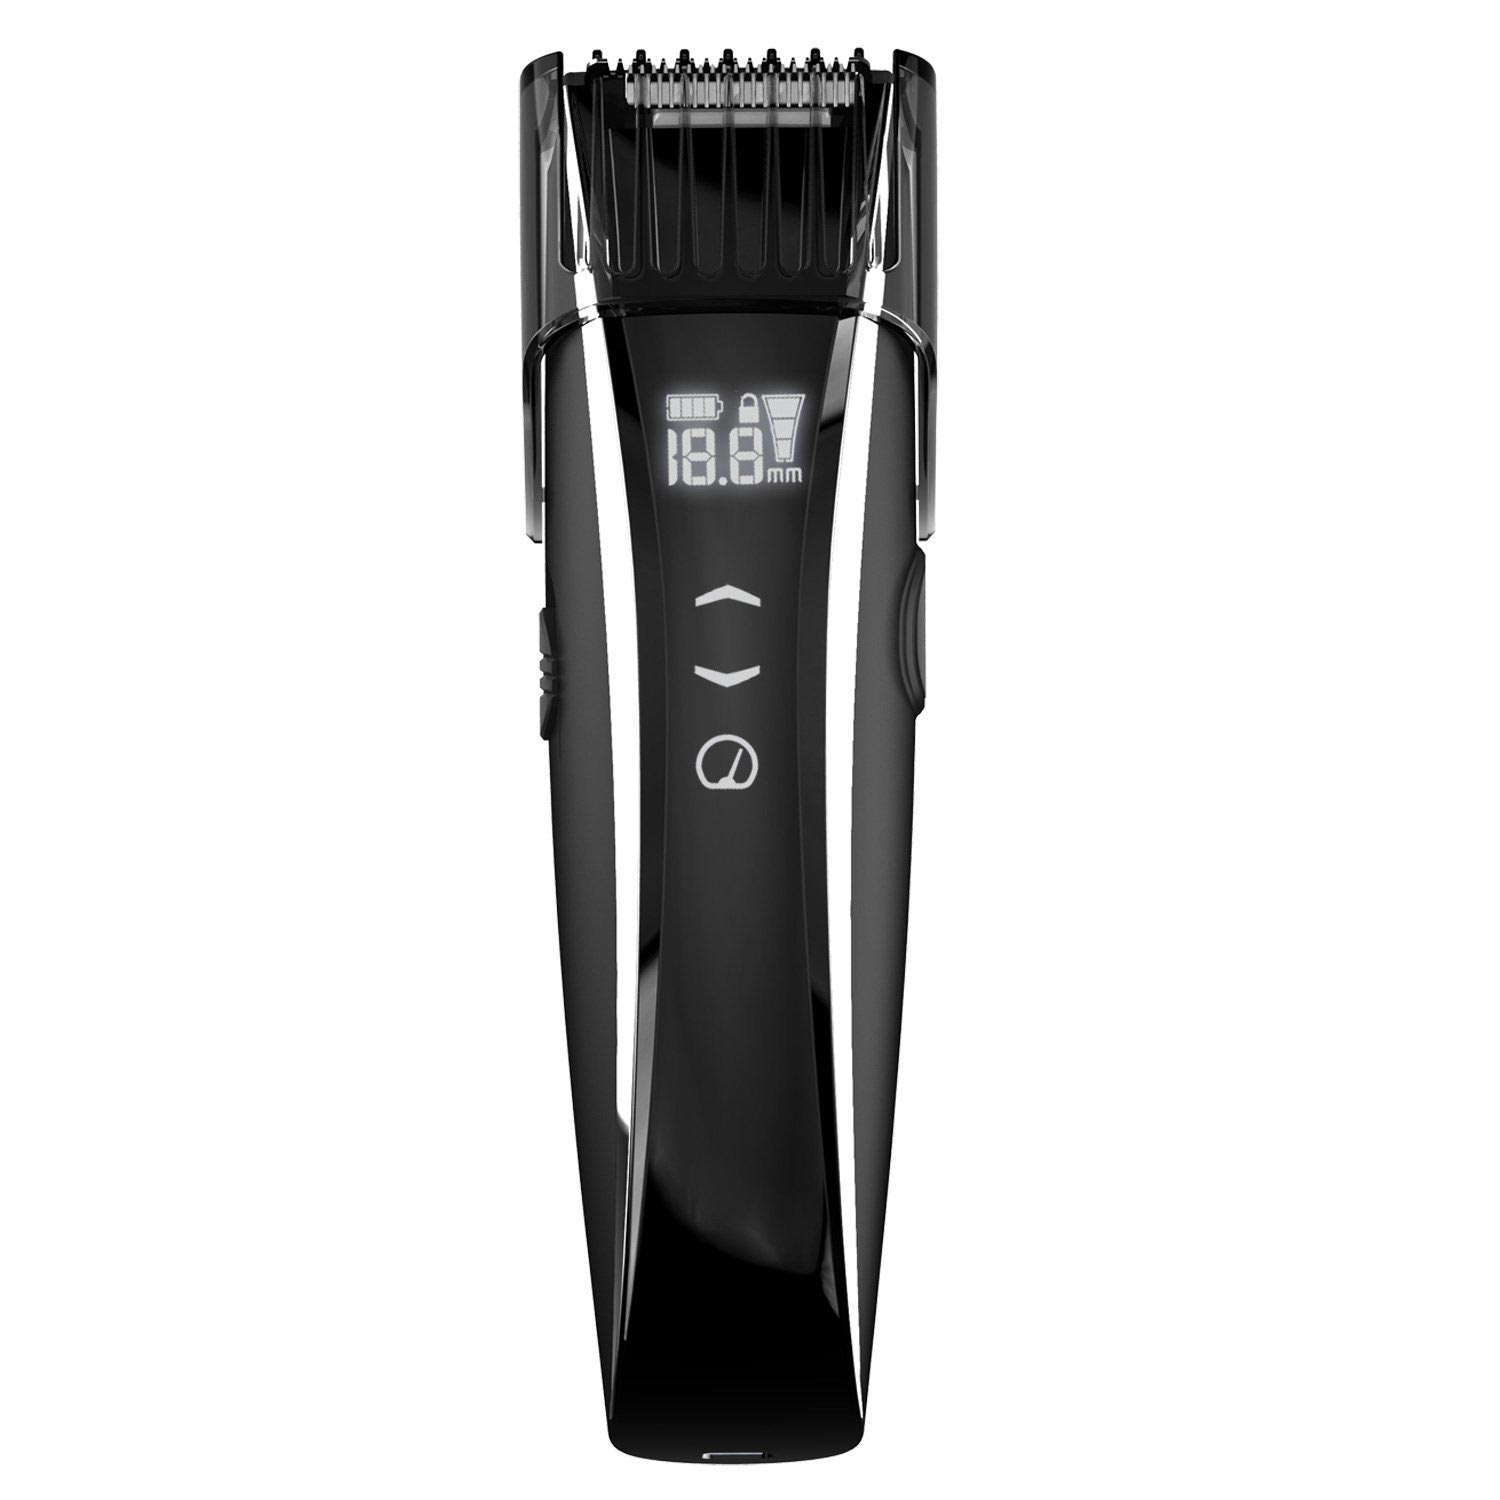 Remington MB4550T Rechargeable Men's Mustache and Beard Trimmer with Exclusive Touch Control